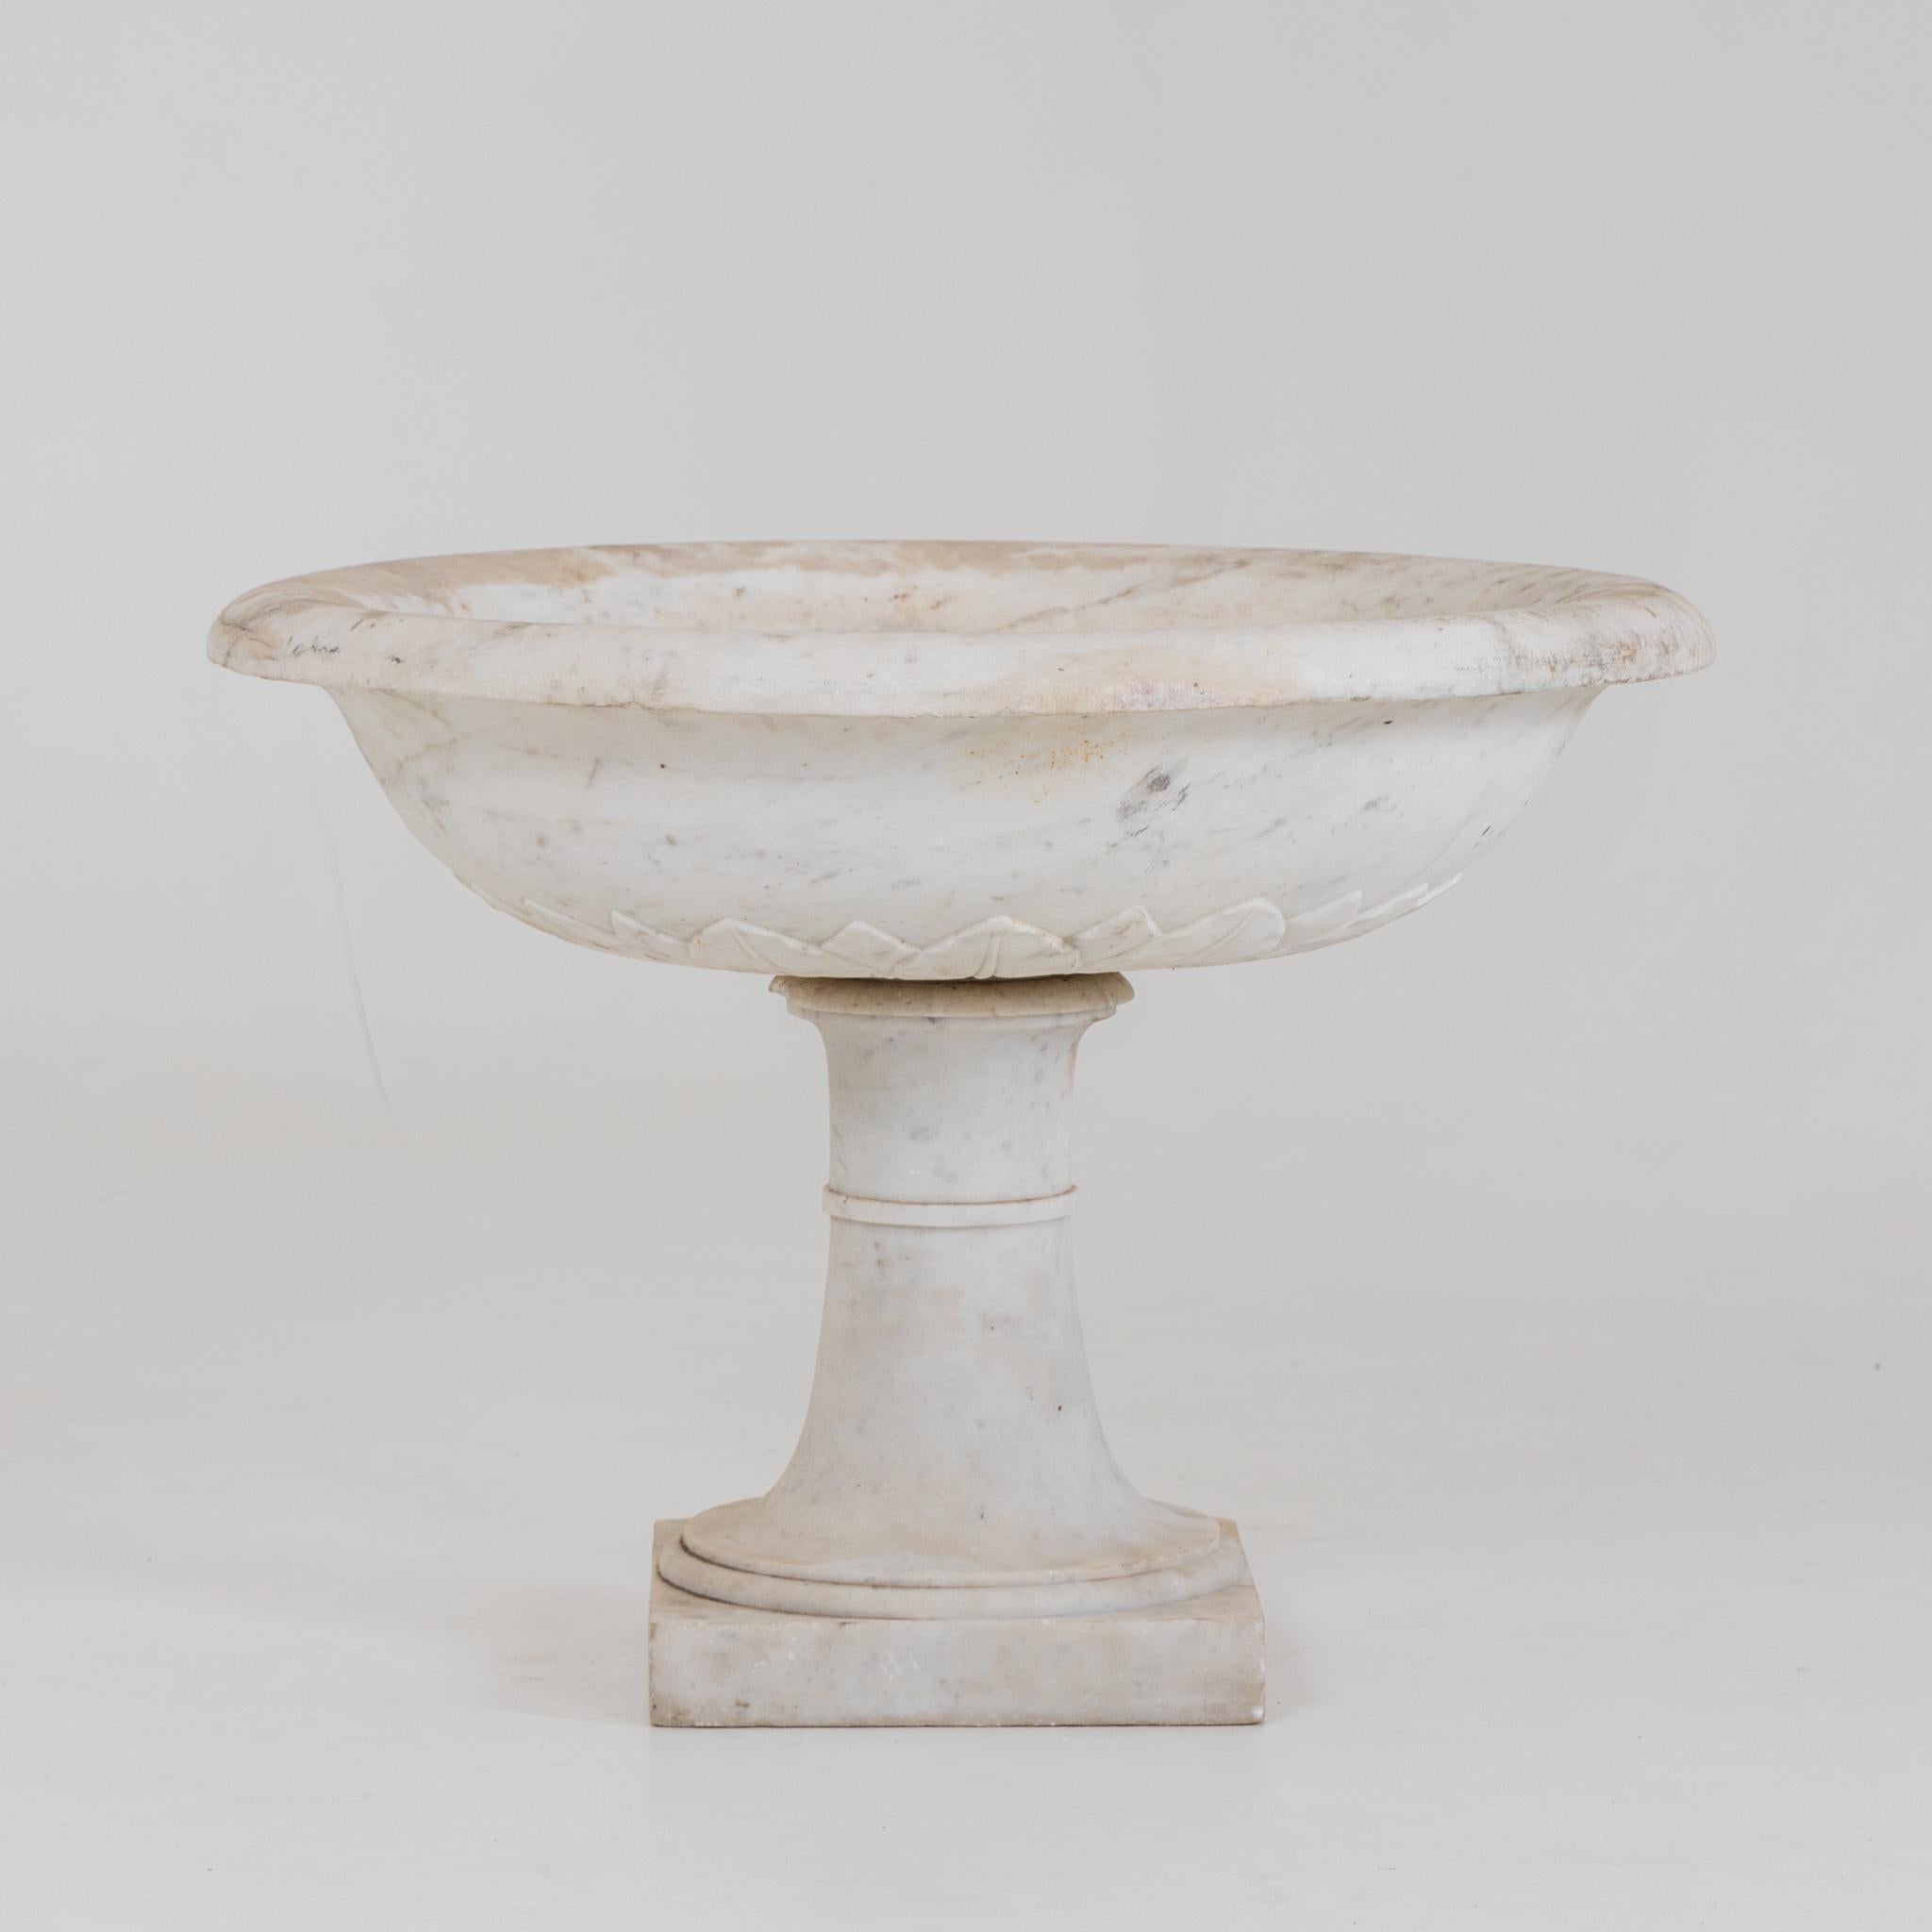 Round marble fountain basin on conical shaft and square plinth and discreet leaf frieze on the tulip-shaped wall.